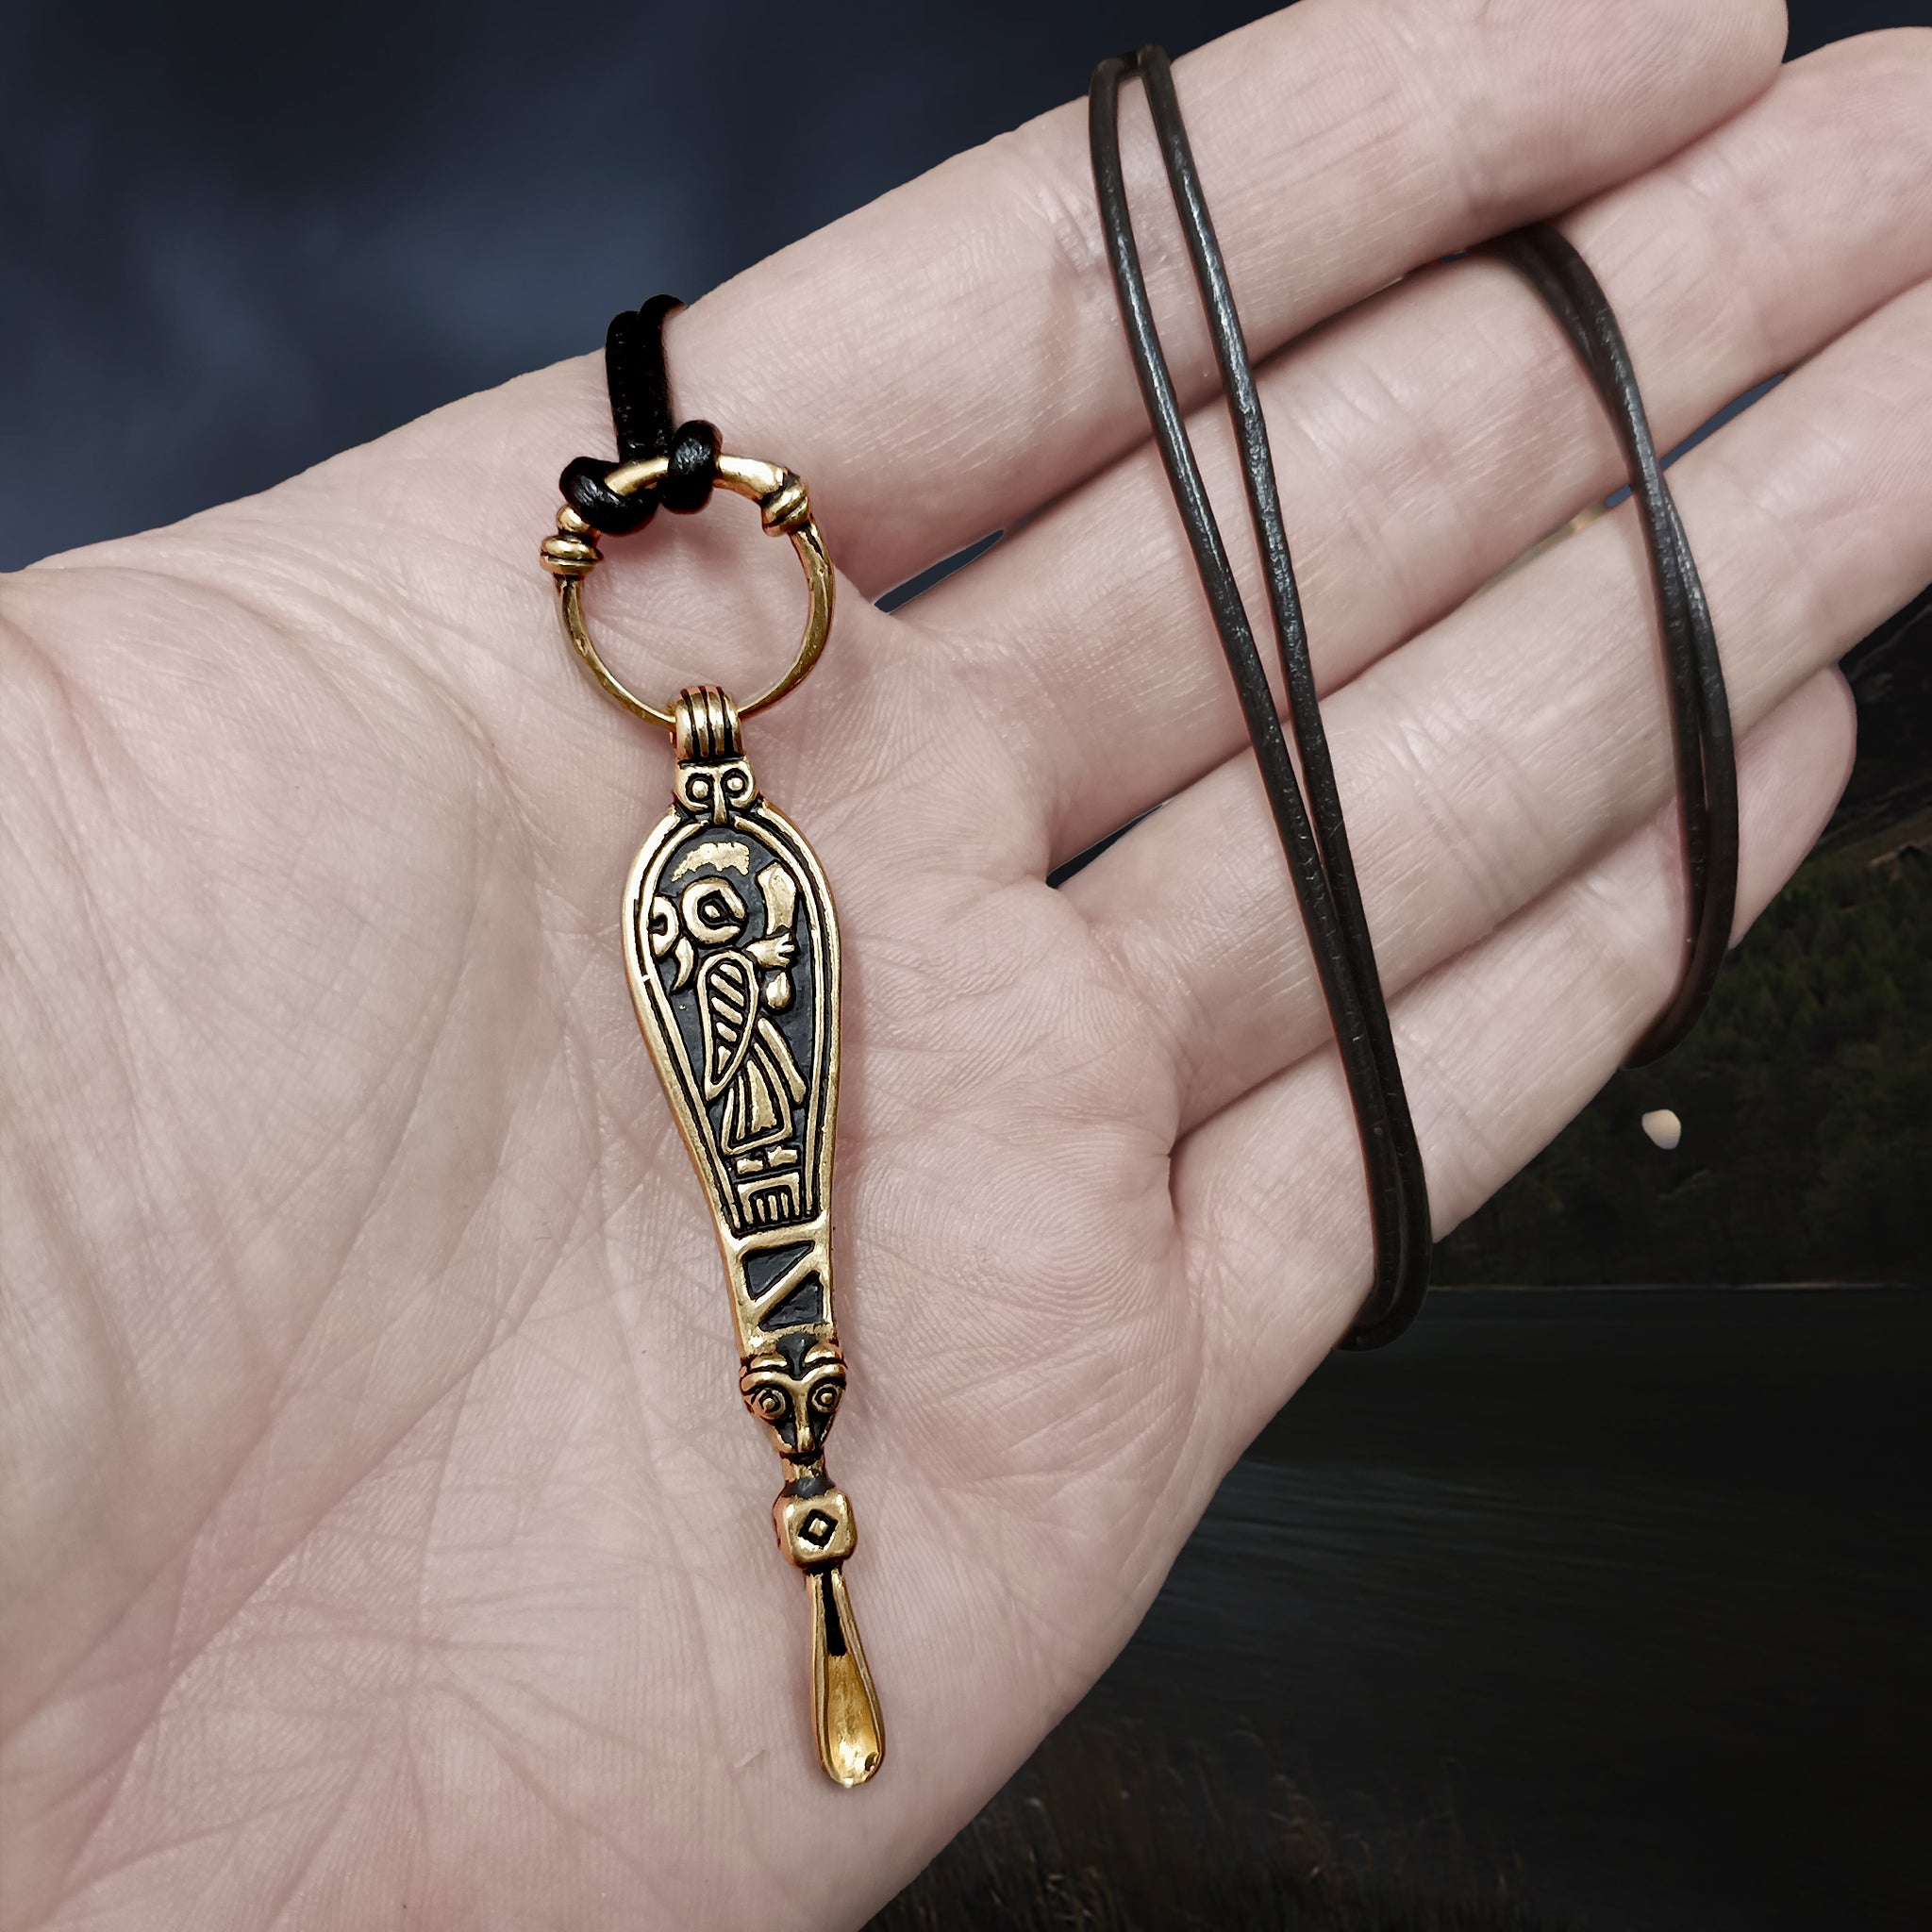 Bronze Ear Spoon Viking Pendant with Ring Hanger on Leather Thong on Hand